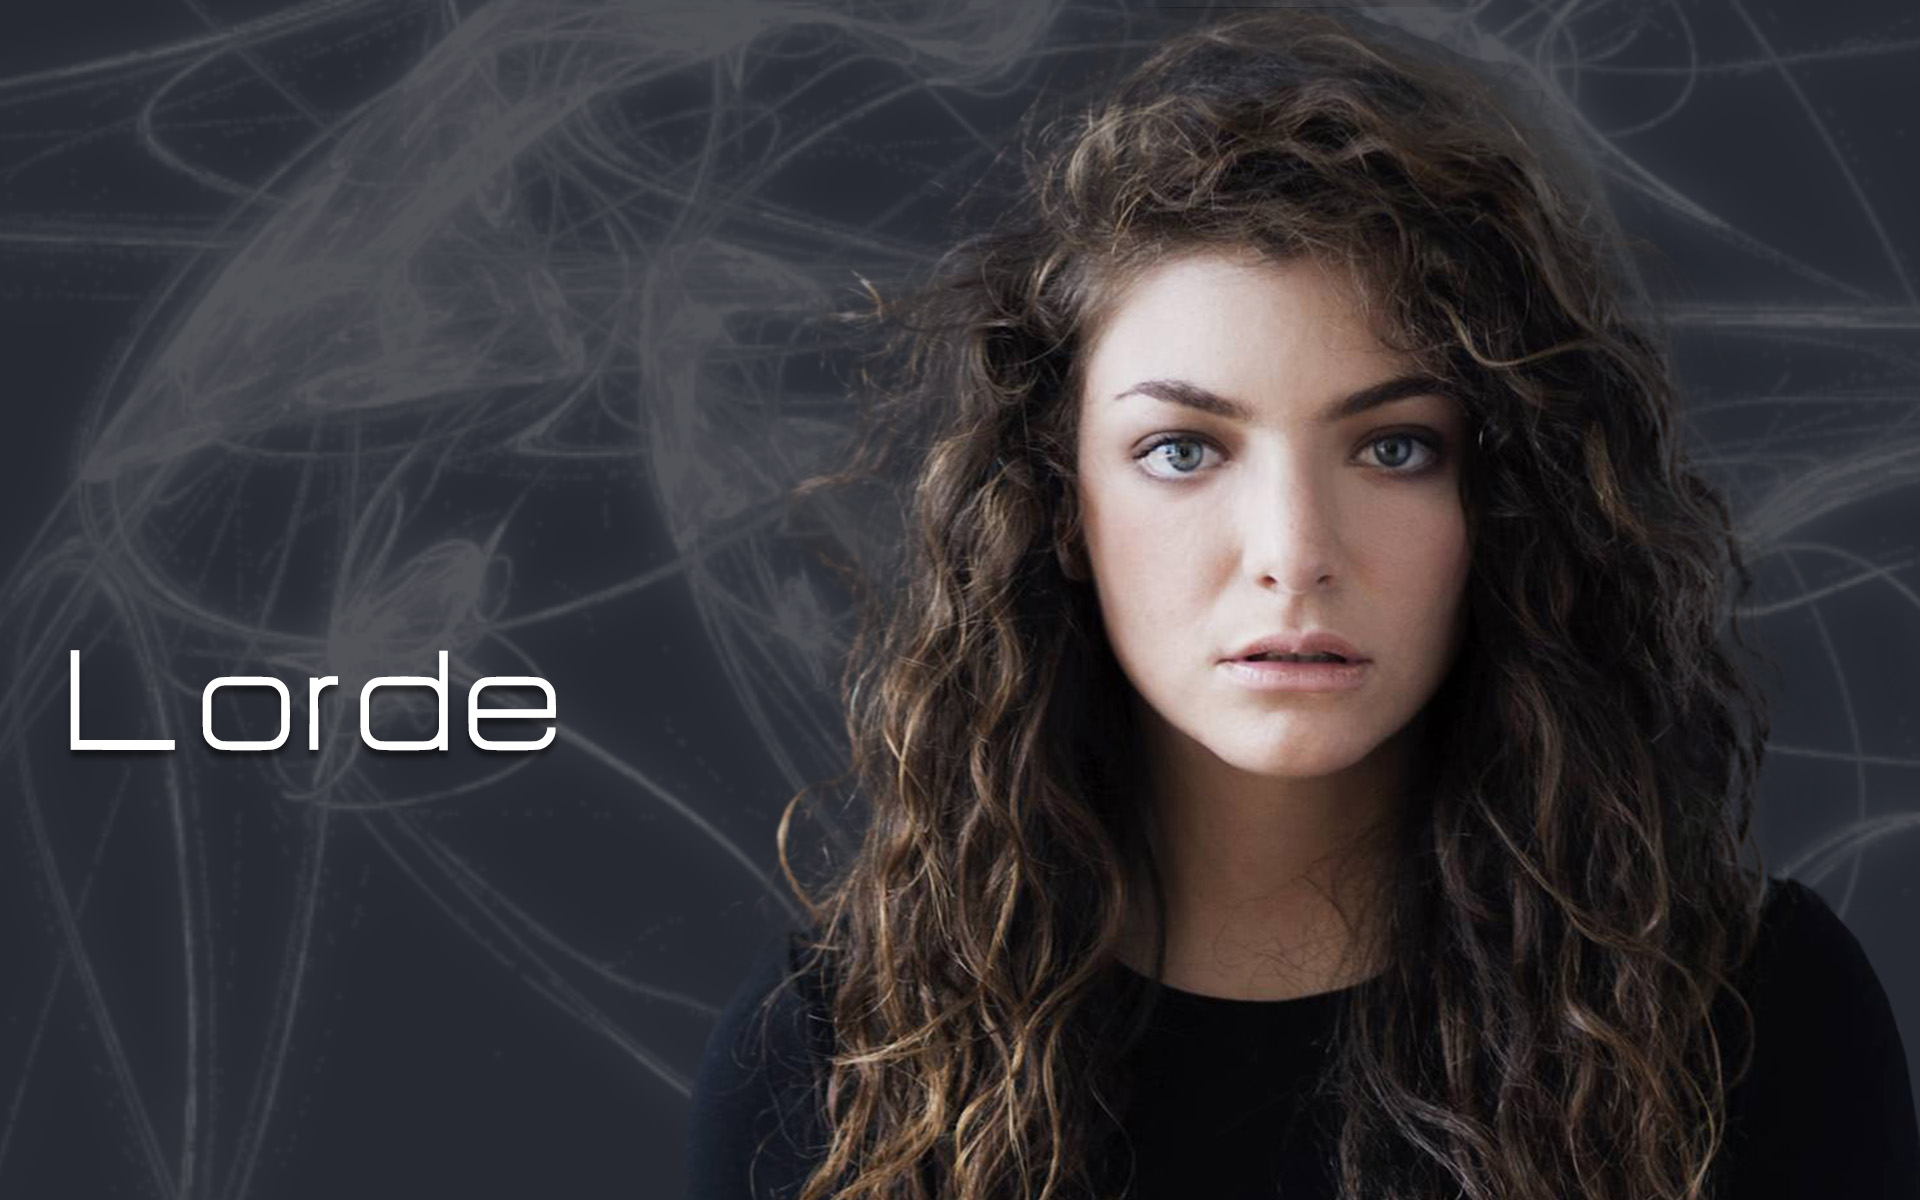 Quotes By Lorde The Singer.